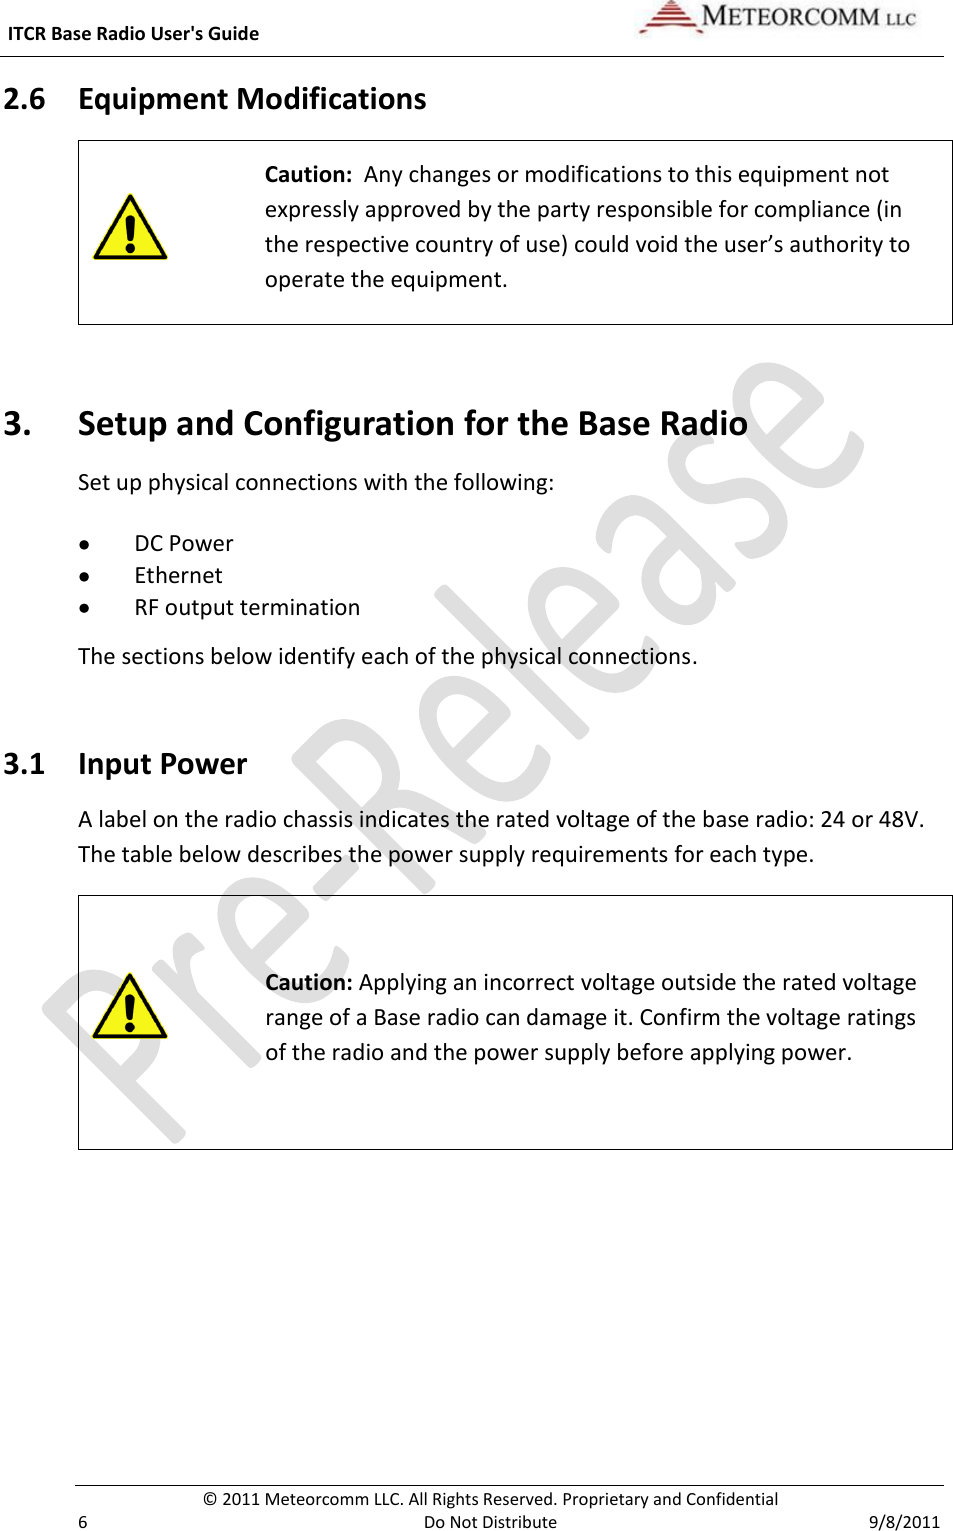  ITCR Base Radio User&apos;s Guide     © 2011 Meteorcomm LLC. All Rights Reserved. Proprietary and Confidential   6  Do Not Distribute  9/8/2011 2.6 Equipment Modifications   Caution:  Any changes or modifications to this equipment not expressly approved by the party responsible for compliance (in the respective country of use) could void the user’s authority to operate the equipment. 3. Setup and Configuration for the Base Radio Set up physical connections with the following:  DC Power  Ethernet  RF output termination The sections below identify each of the physical connections. 3.1 Input Power A label on the radio chassis indicates the rated voltage of the base radio: 24 or 48V. The table below describes the power supply requirements for each type.  Caution: Applying an incorrect voltage outside the rated voltage range of a Base radio can damage it. Confirm the voltage ratings of the radio and the power supply before applying power.  